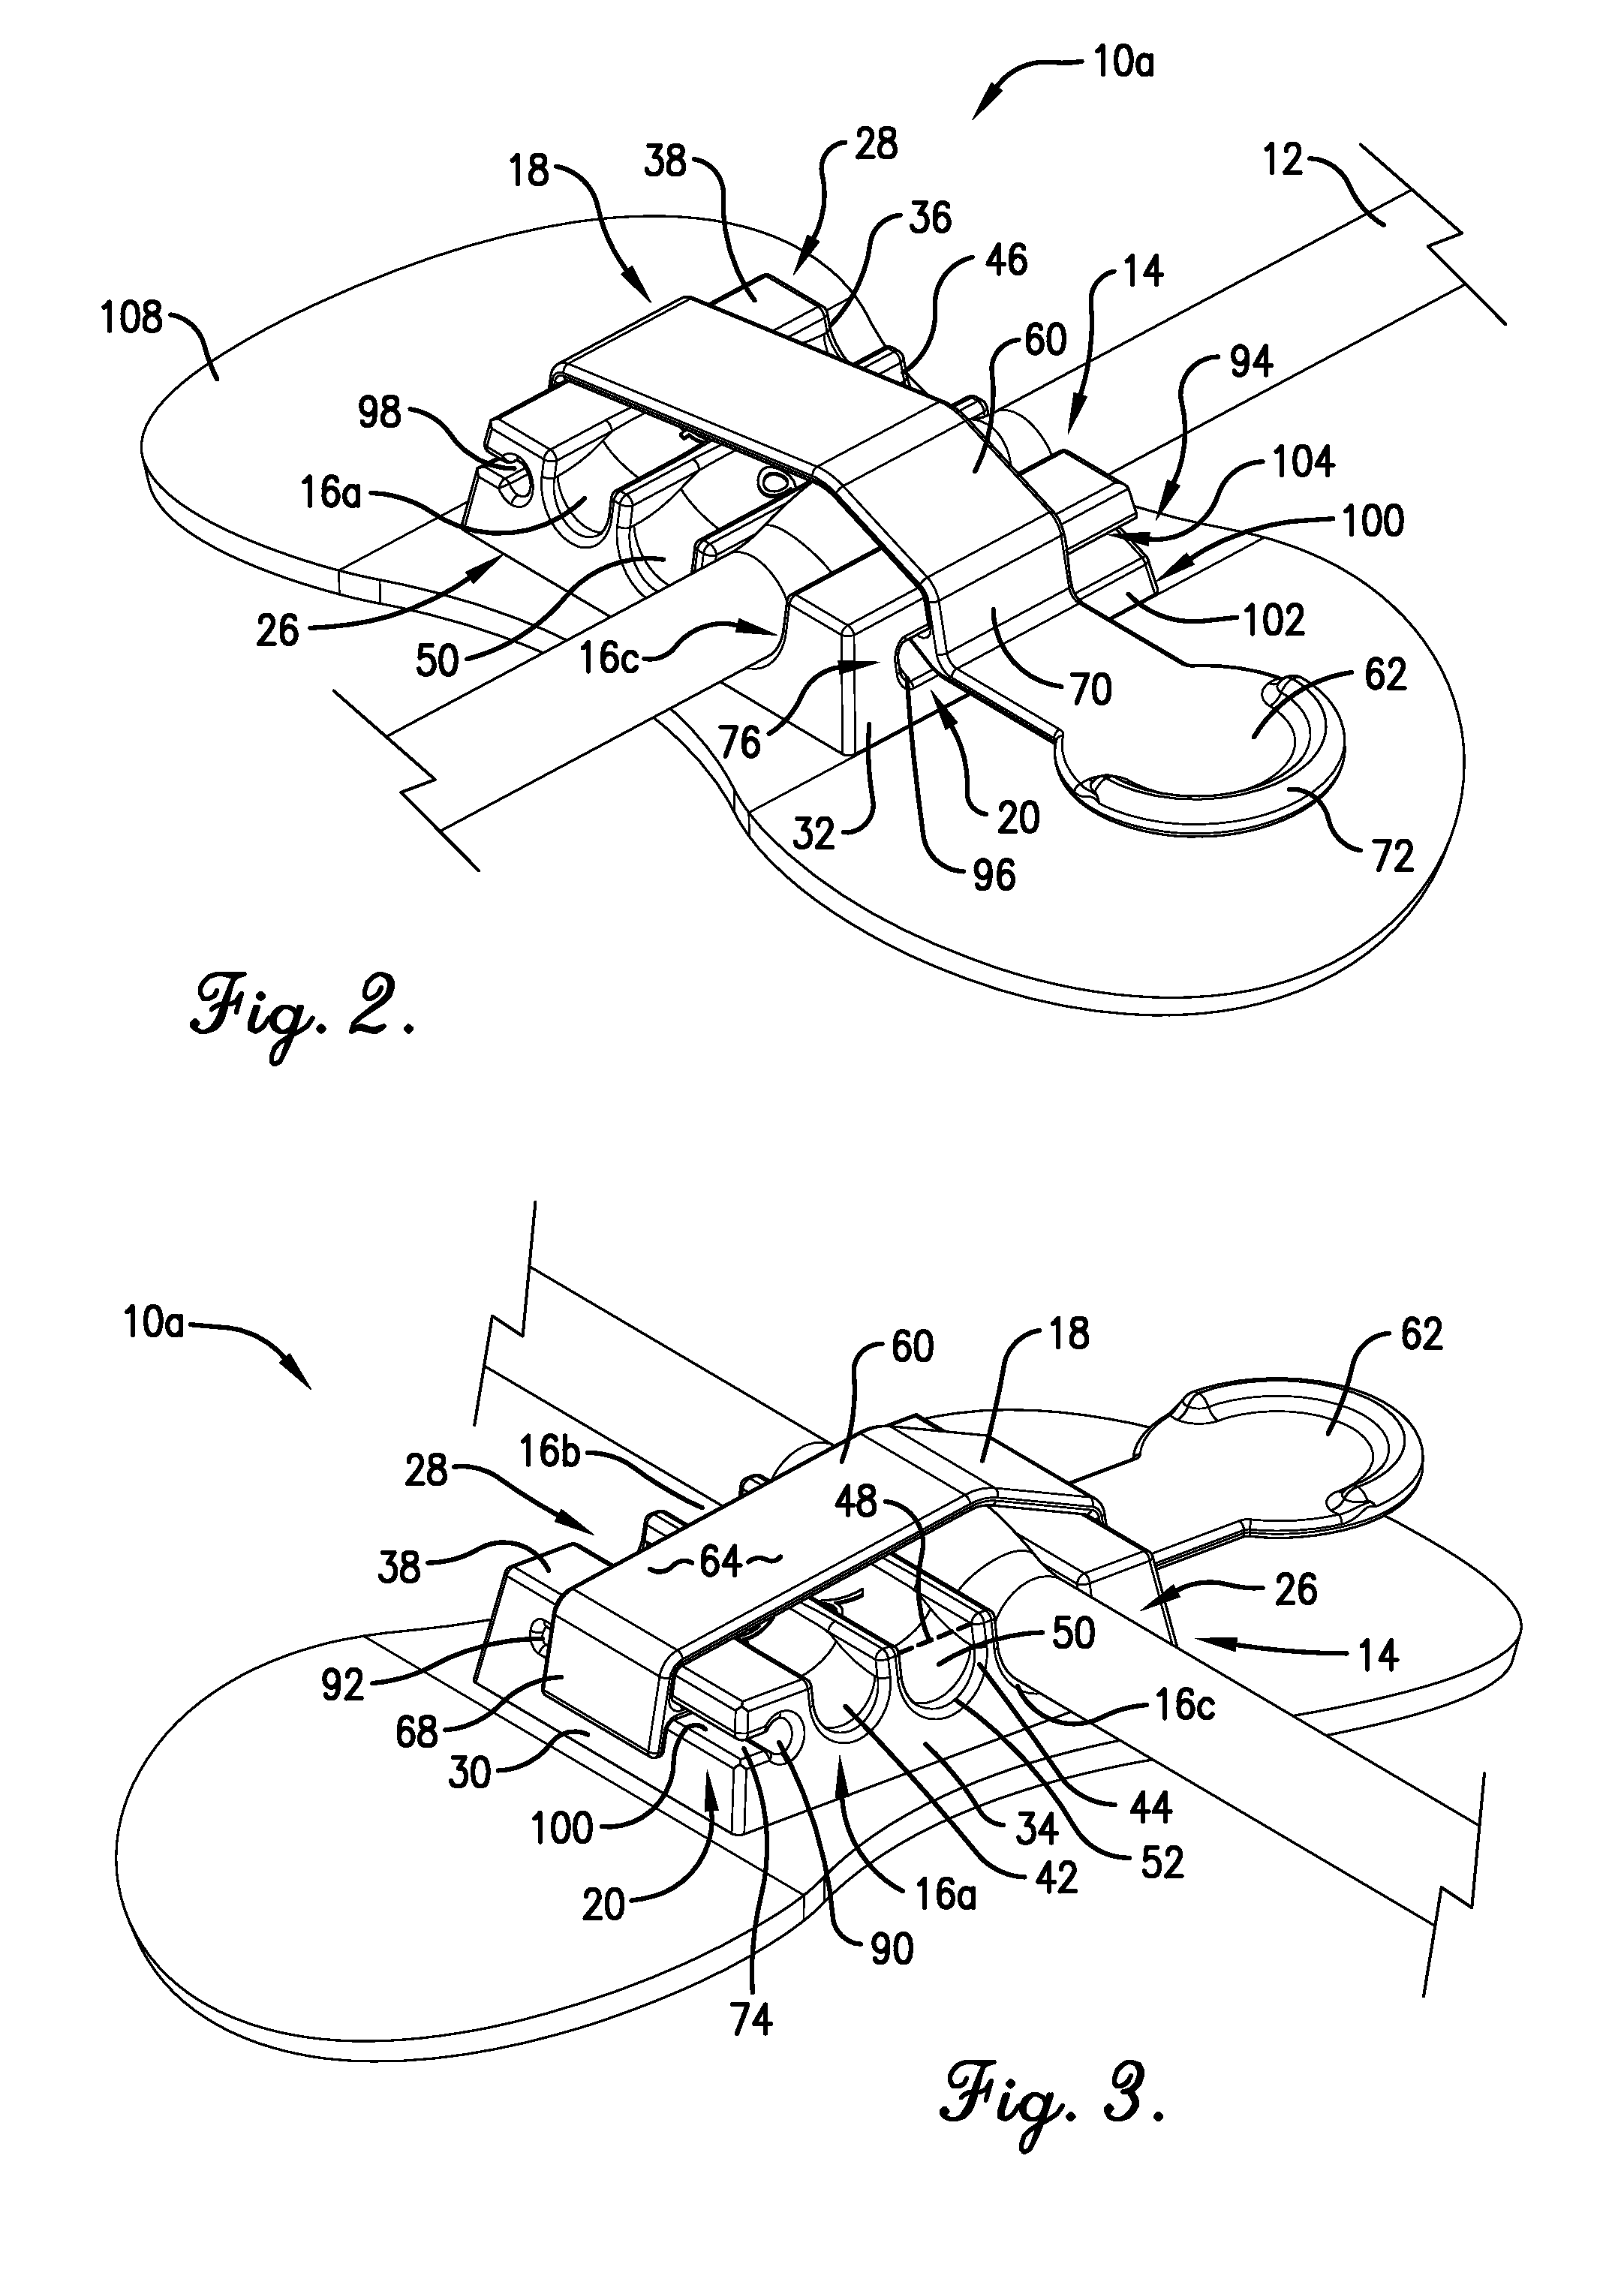 Securement device for medical fixtures